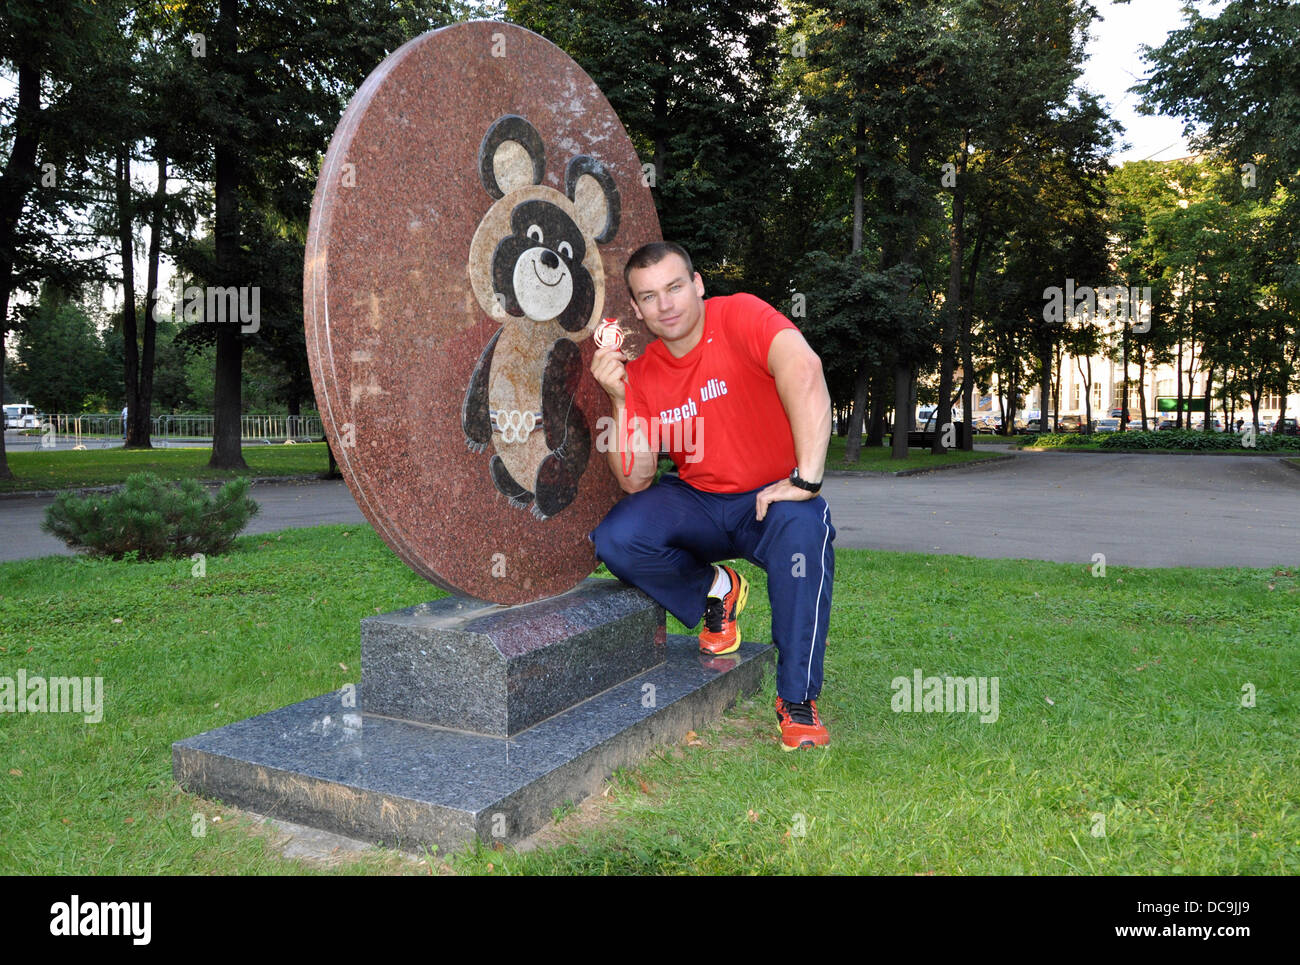 Moscow, Russia. 13th Aug, 2013. Czech Republic's Lukas Melich poses with his bronze medal for the men's hammer throw at the World Athletics Championships in the Luzhniki stadium in Moscow, Russia, Tuesday, August 13, 2013. © Tibor Alfoldi/CTK Photo/Alamy Live News Stock Photo